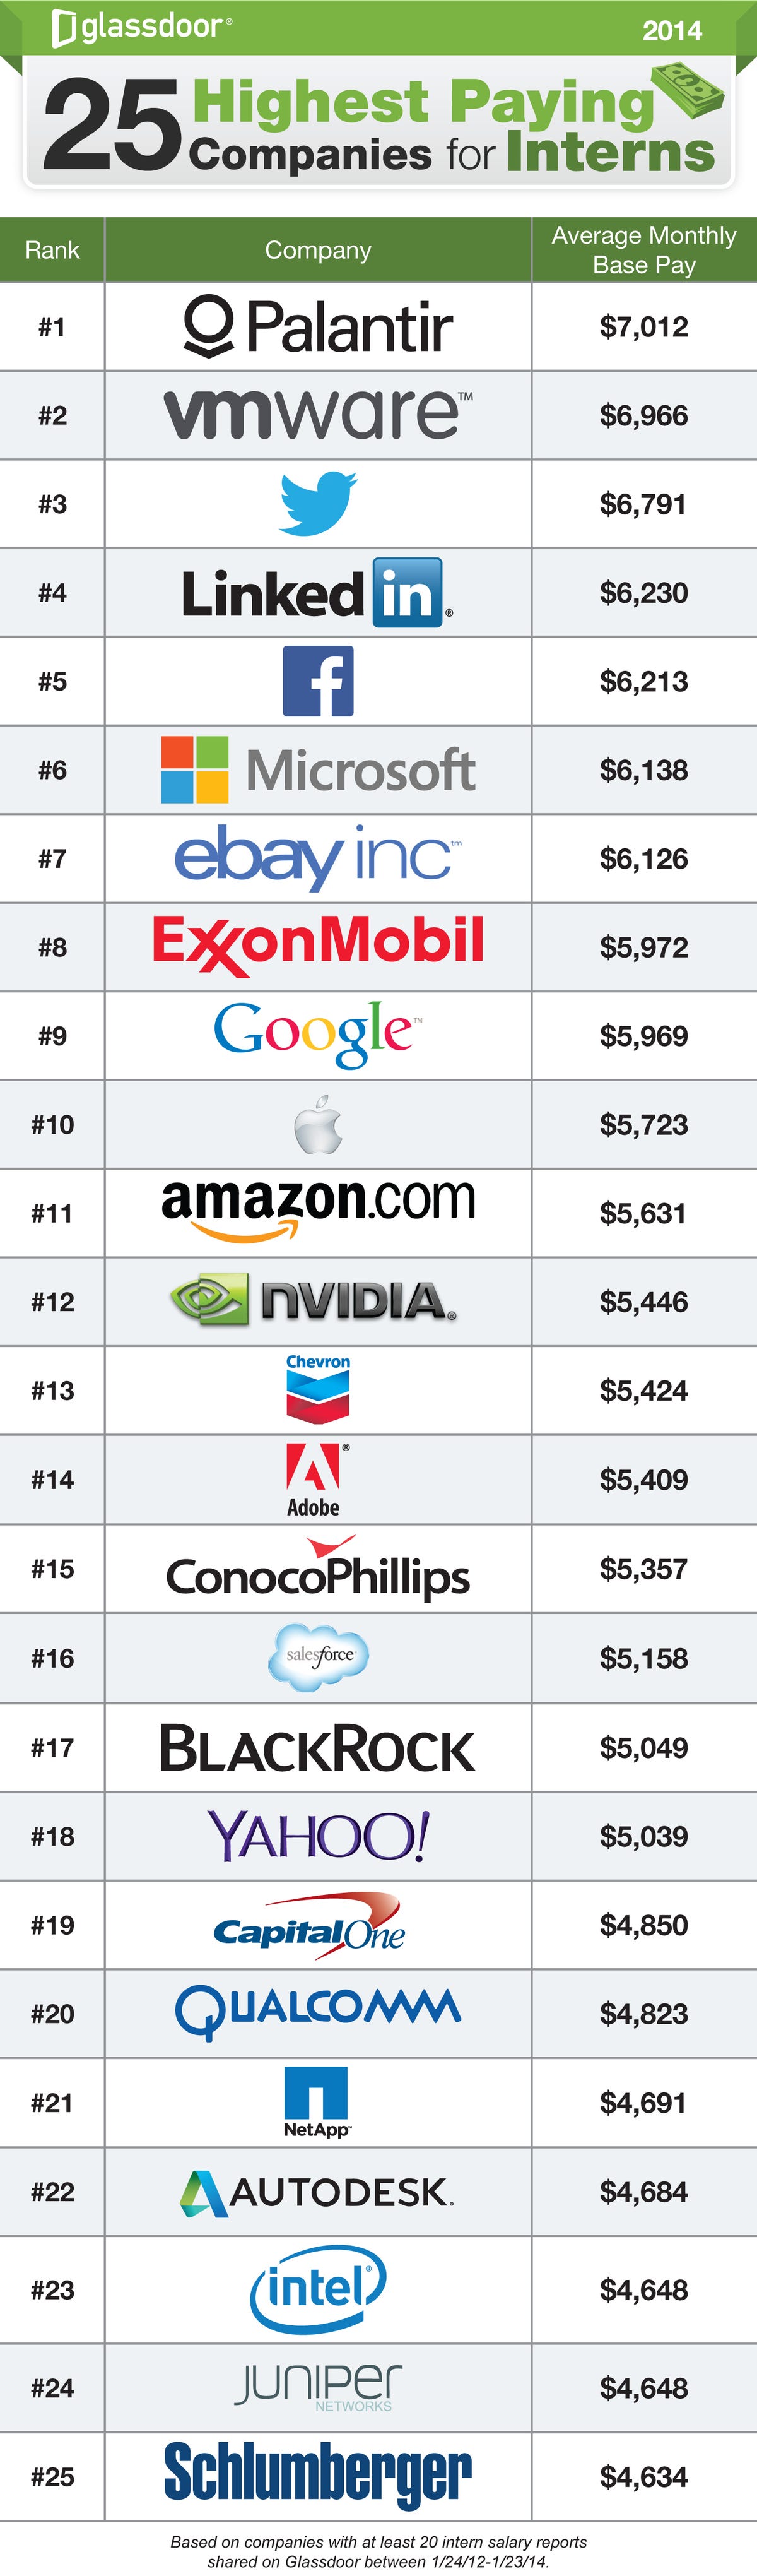 25 highest paying companies for interns